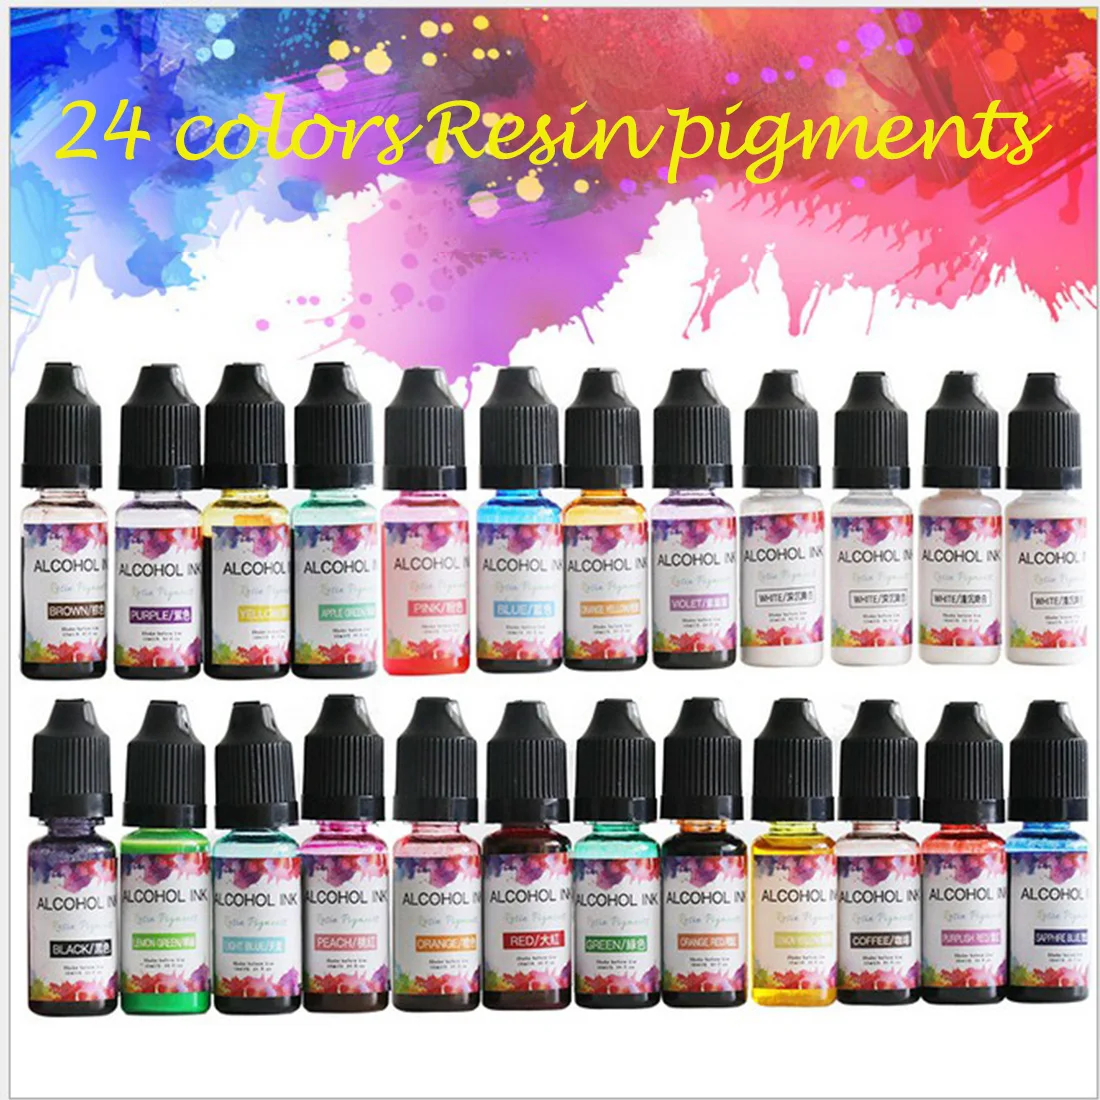 10ml Resin Pigment Kit Art Ink Alcohol Liquid Colorant Dye Ink Diffusion DIY UV Epoxy Resin Mold Jewelry Making